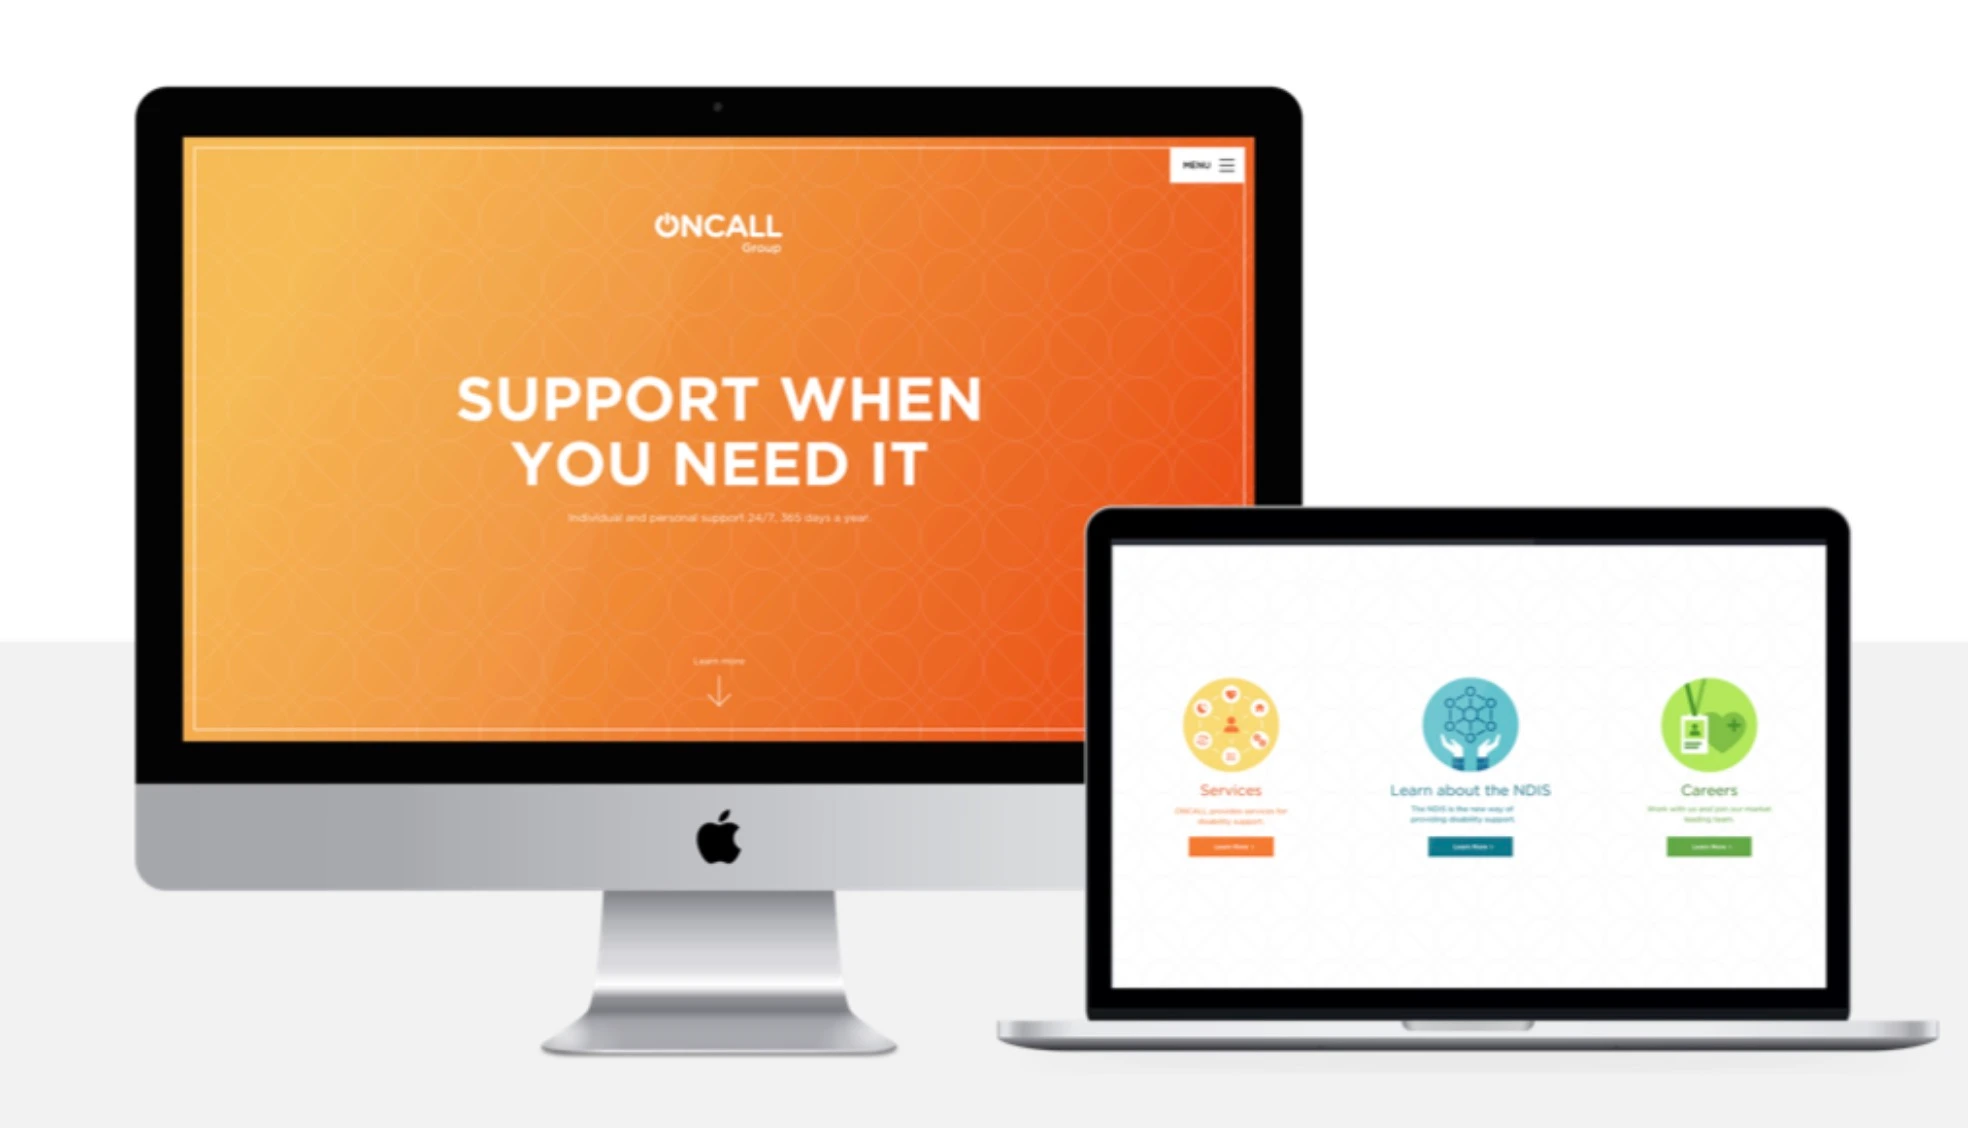 Oncall Website Design Pc and Laptop View